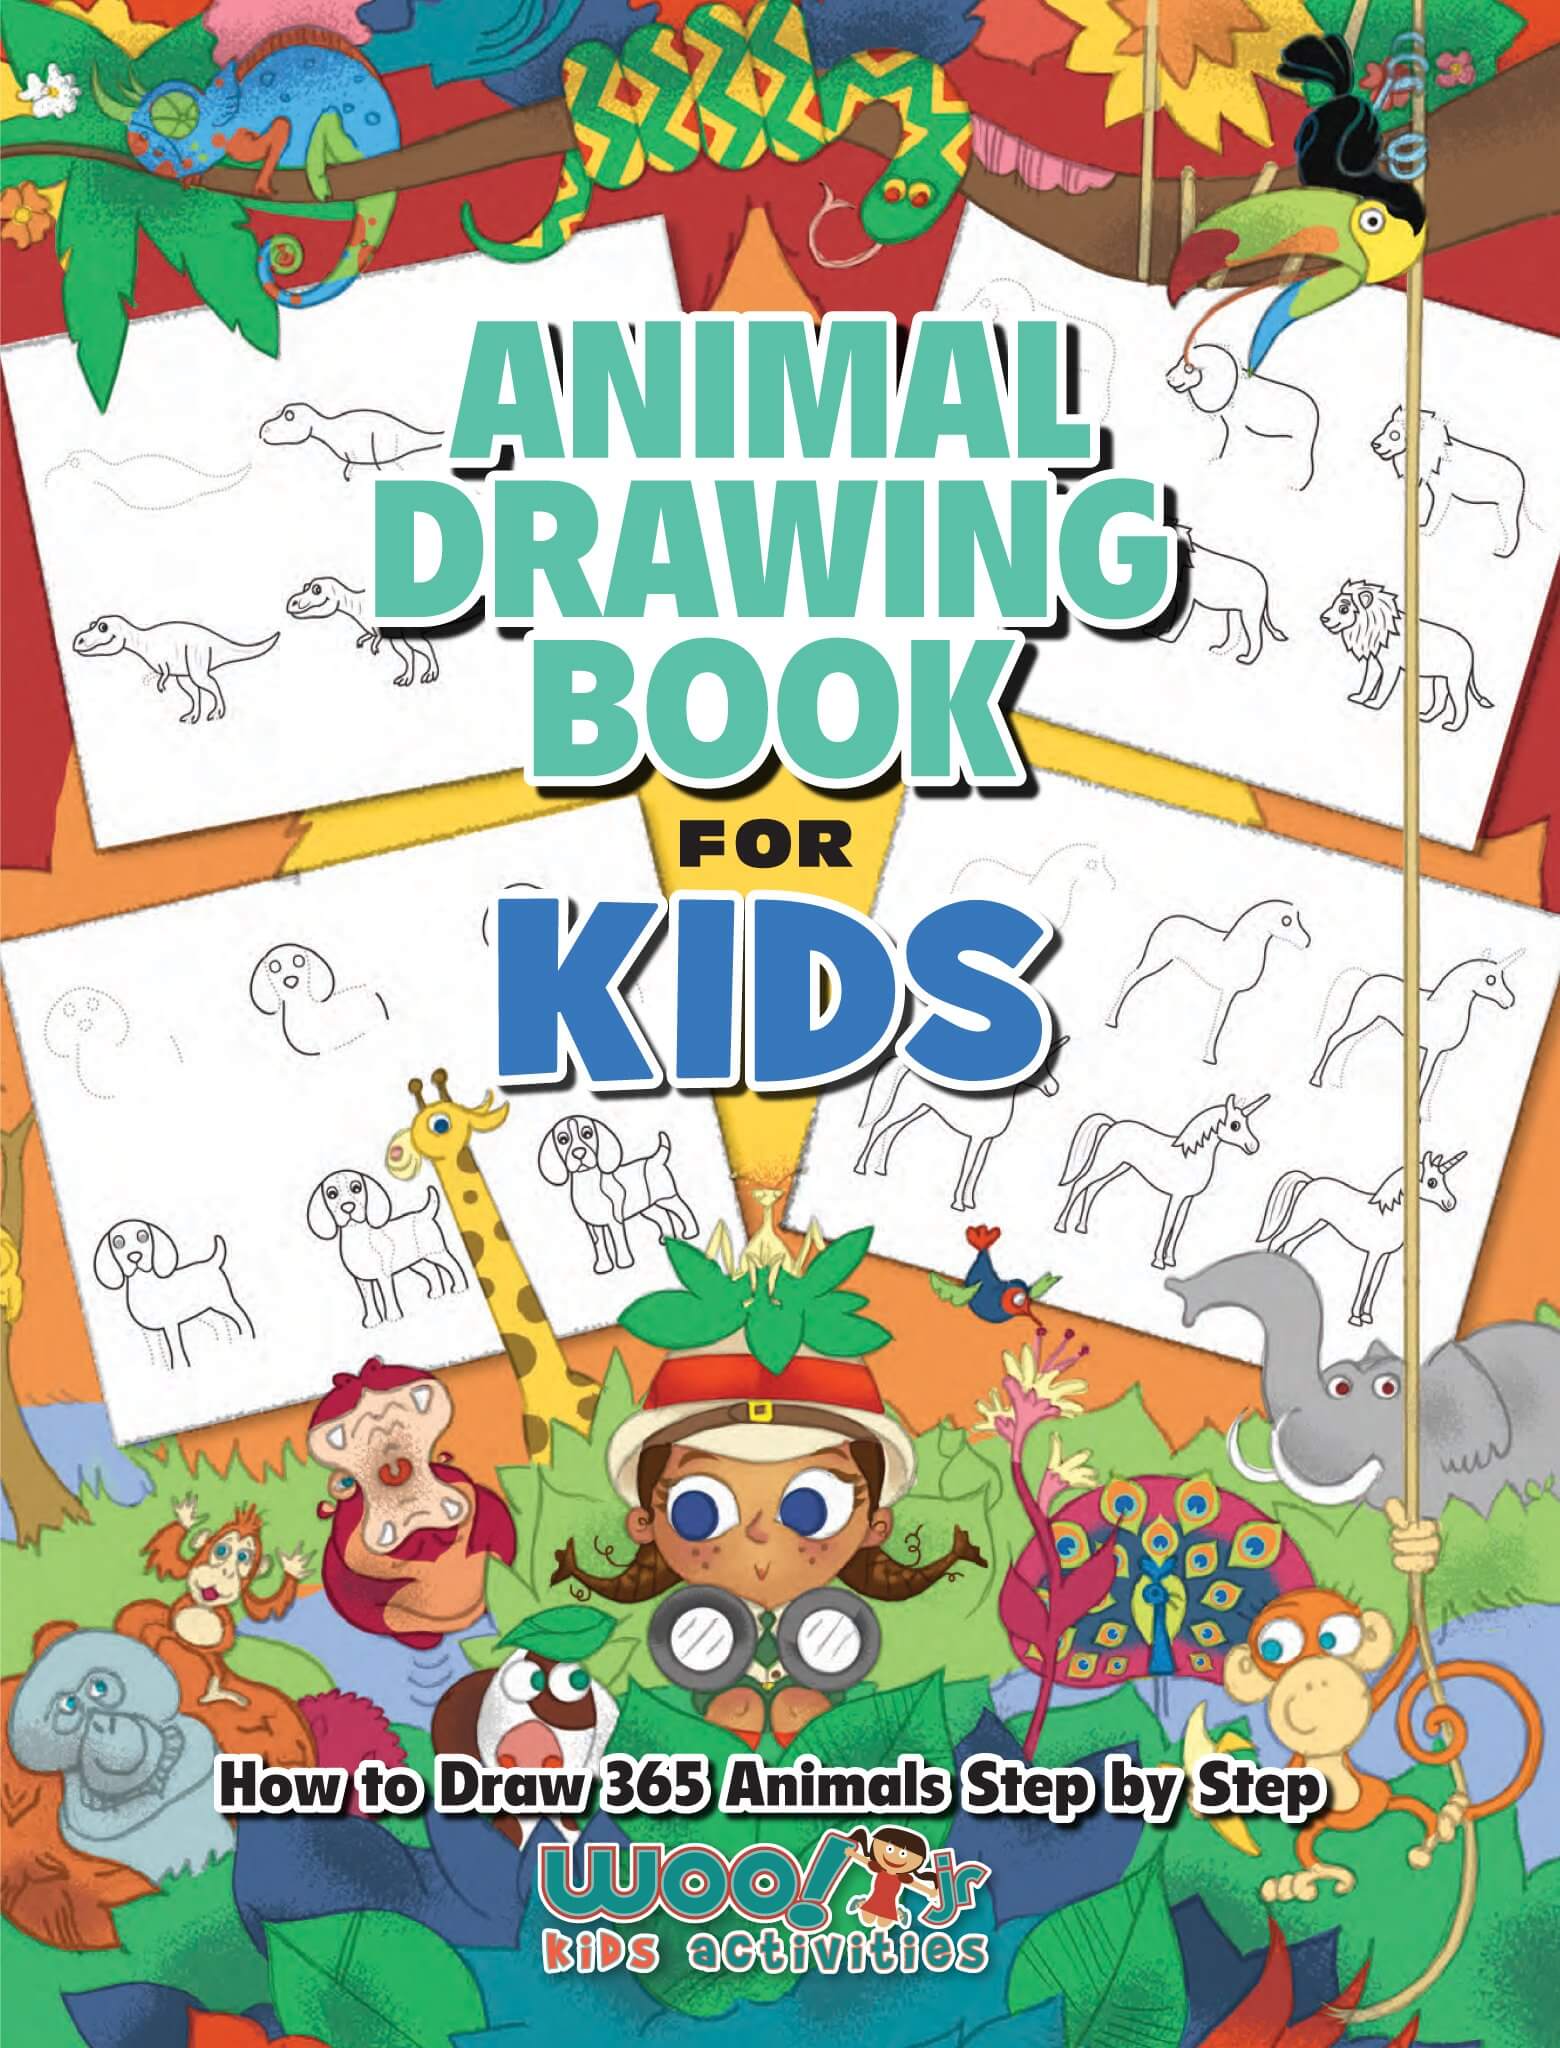 How to draw Zoo Animals and Words: Easy & Fun Drawing and first Words Book  for Kids Age 6-8 (Paperback)